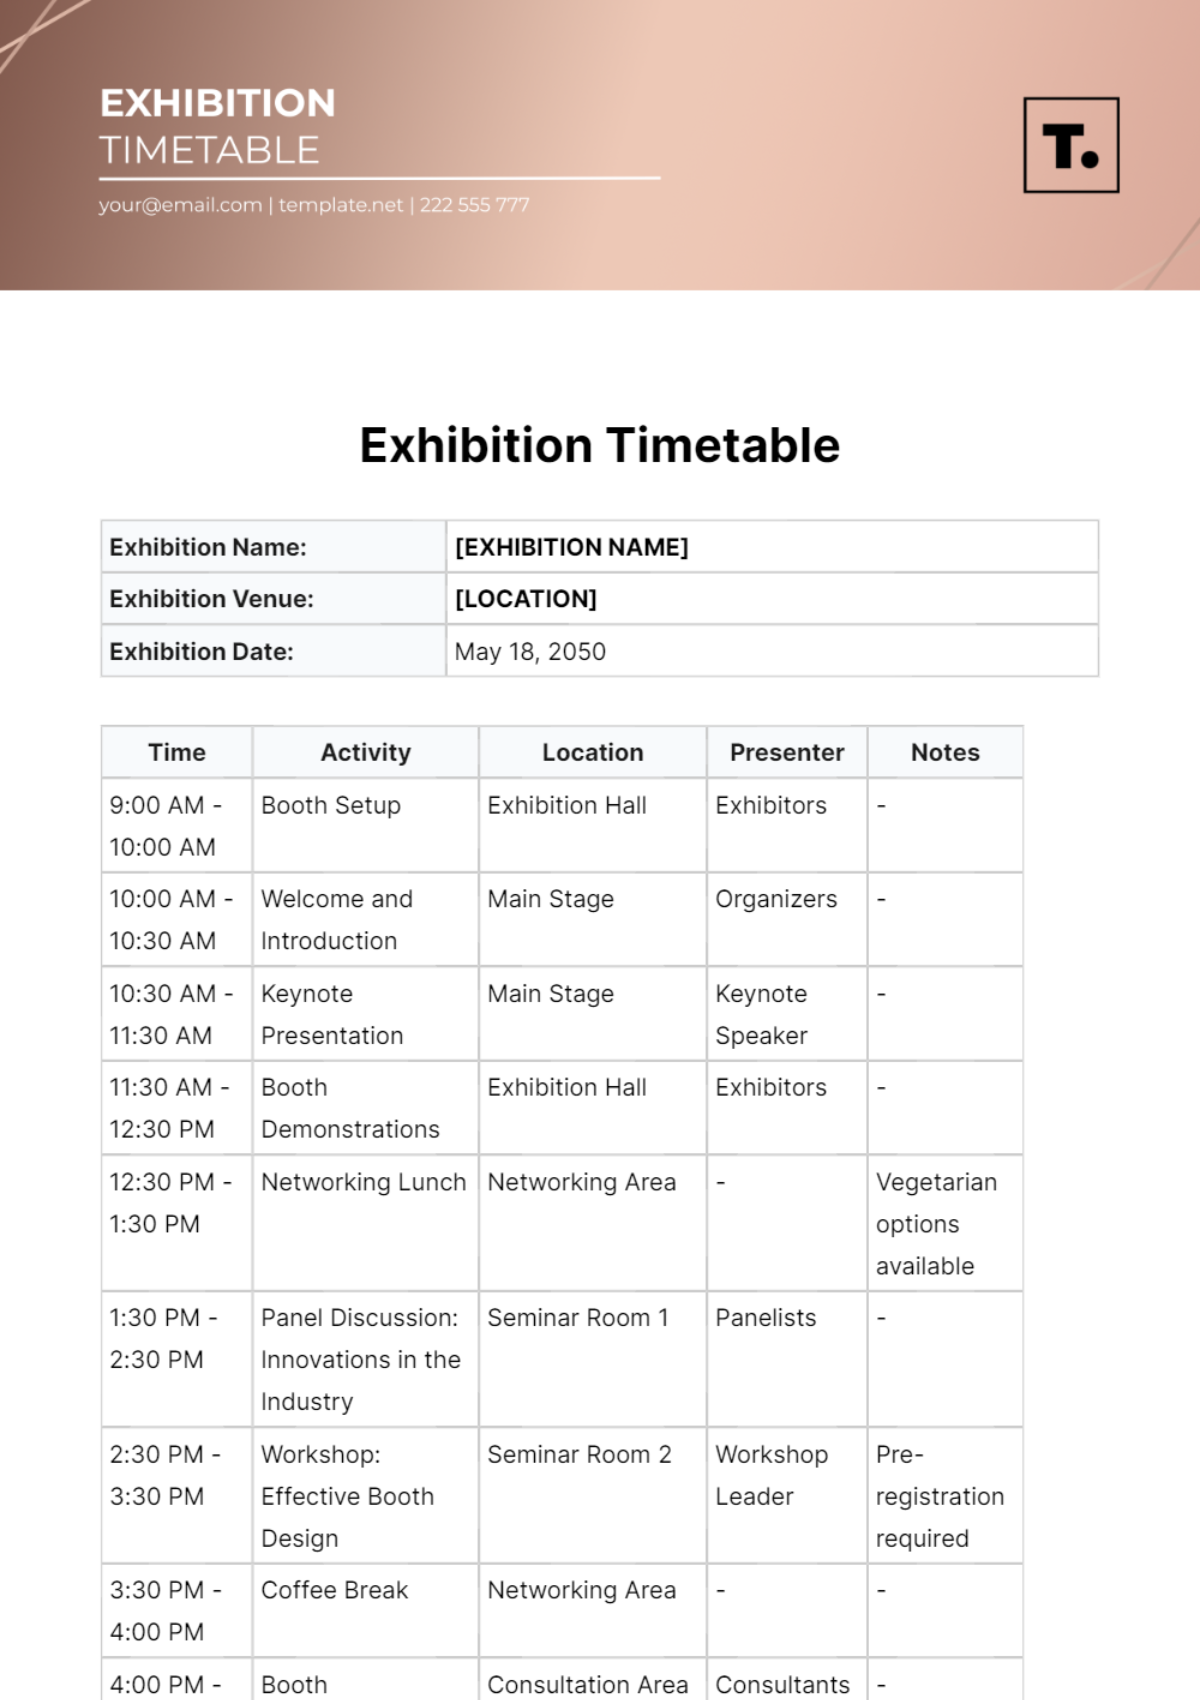 Free Exhibition Timetable Template